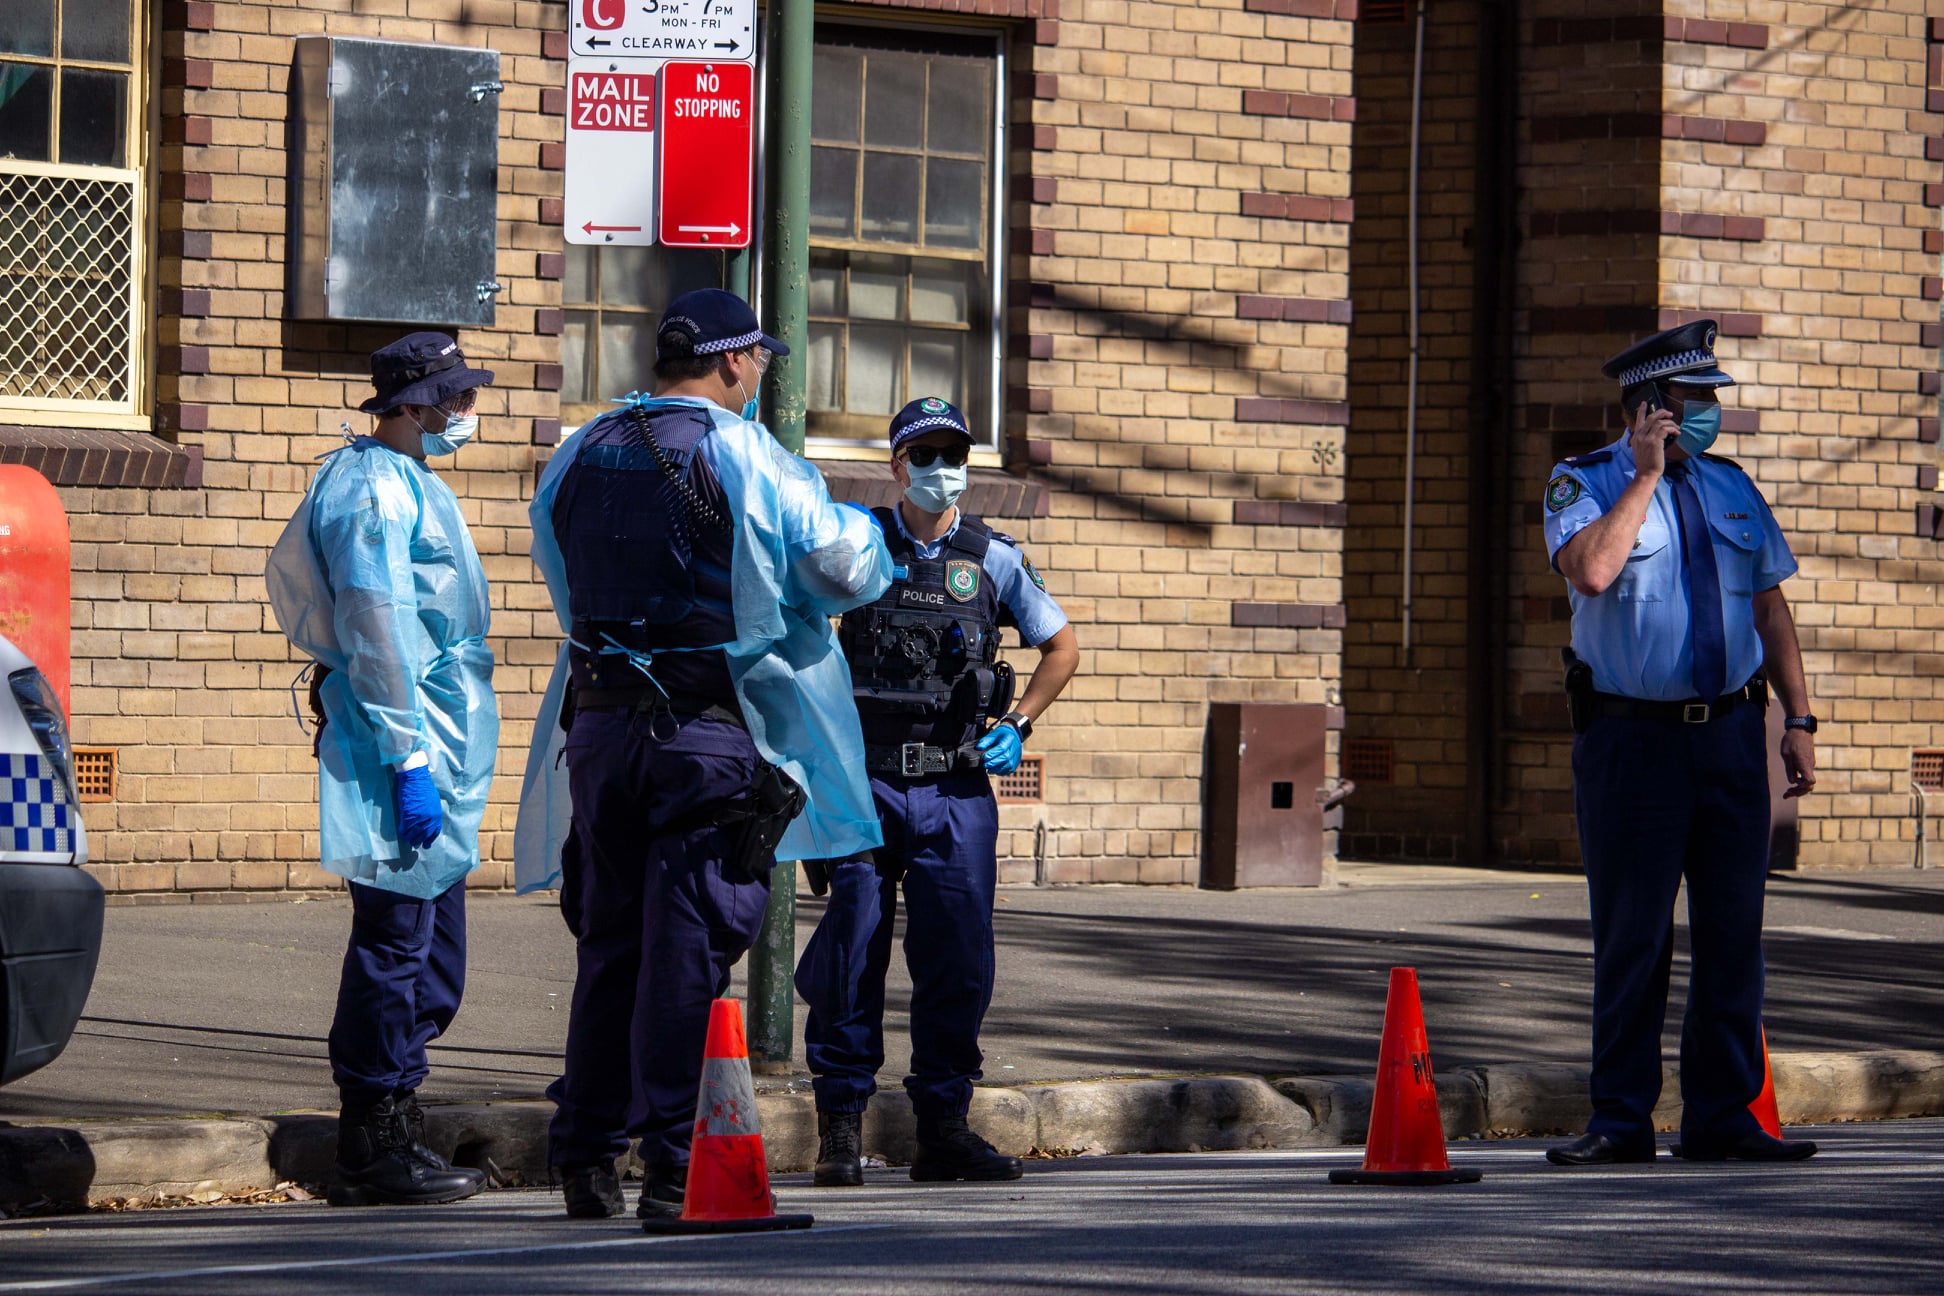 Inner West: Assault to Police surges during the pandemic